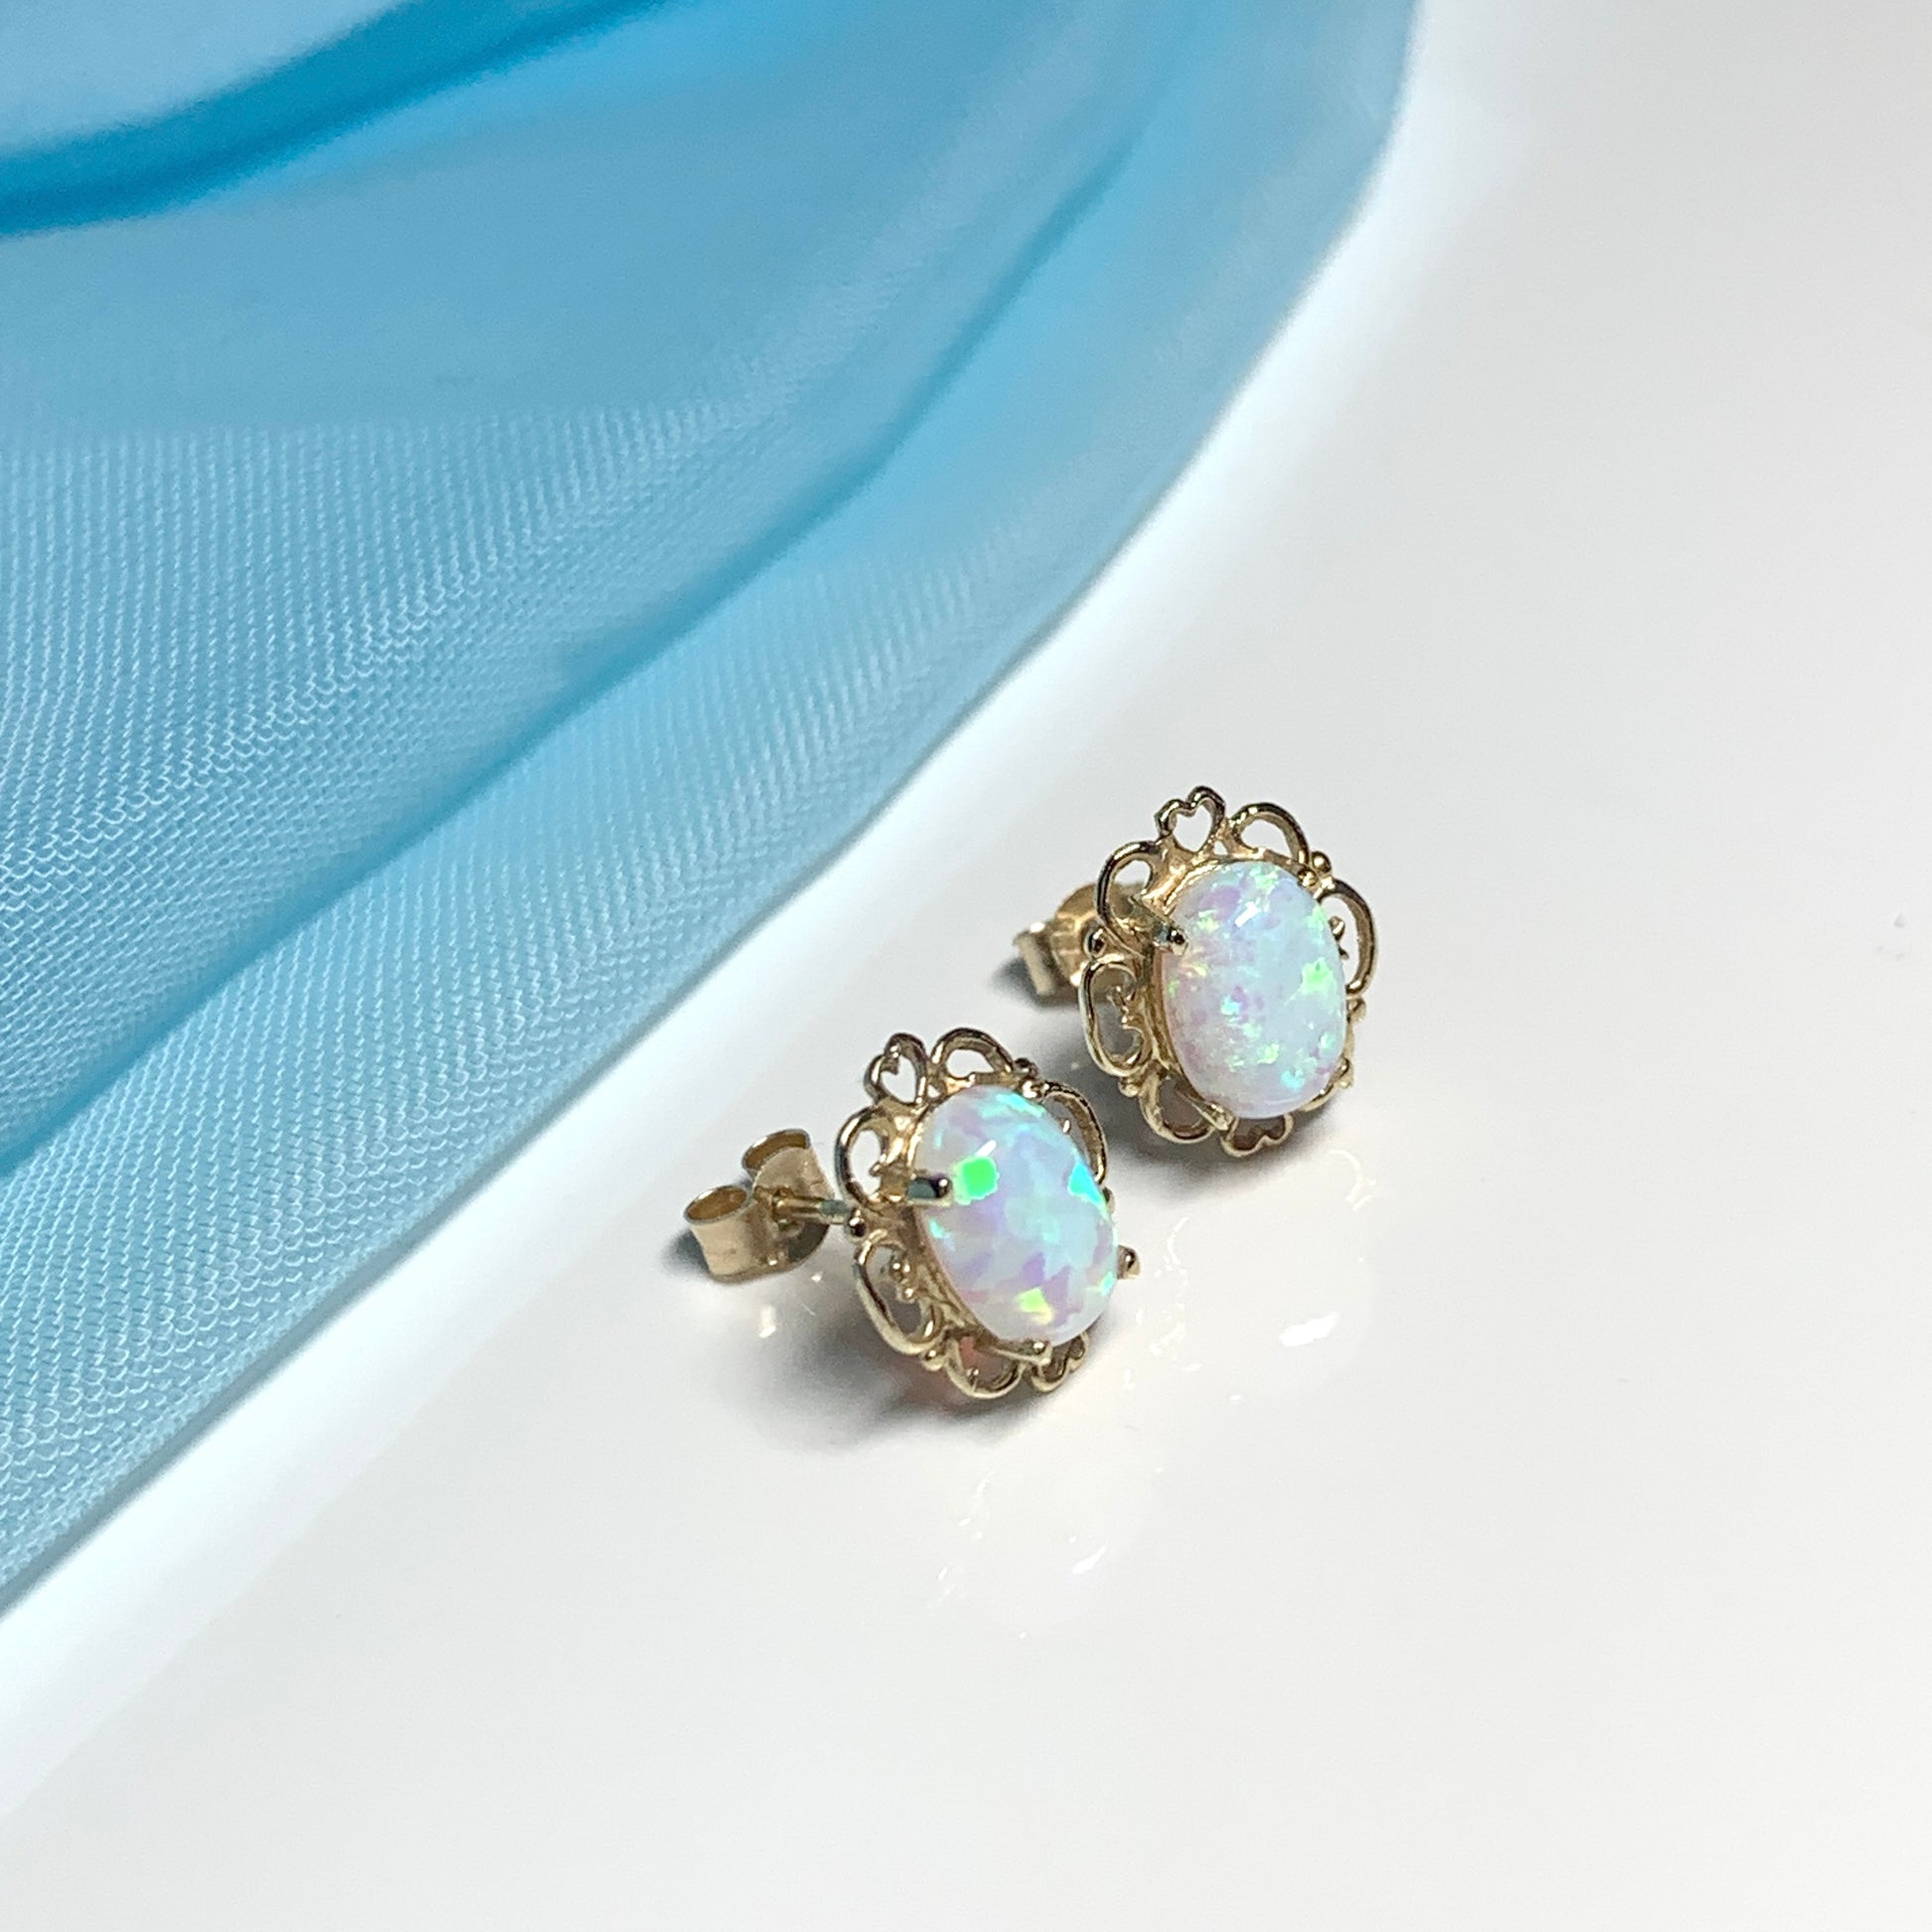 Yellow gold oval opal stud earrings with a pierced setting